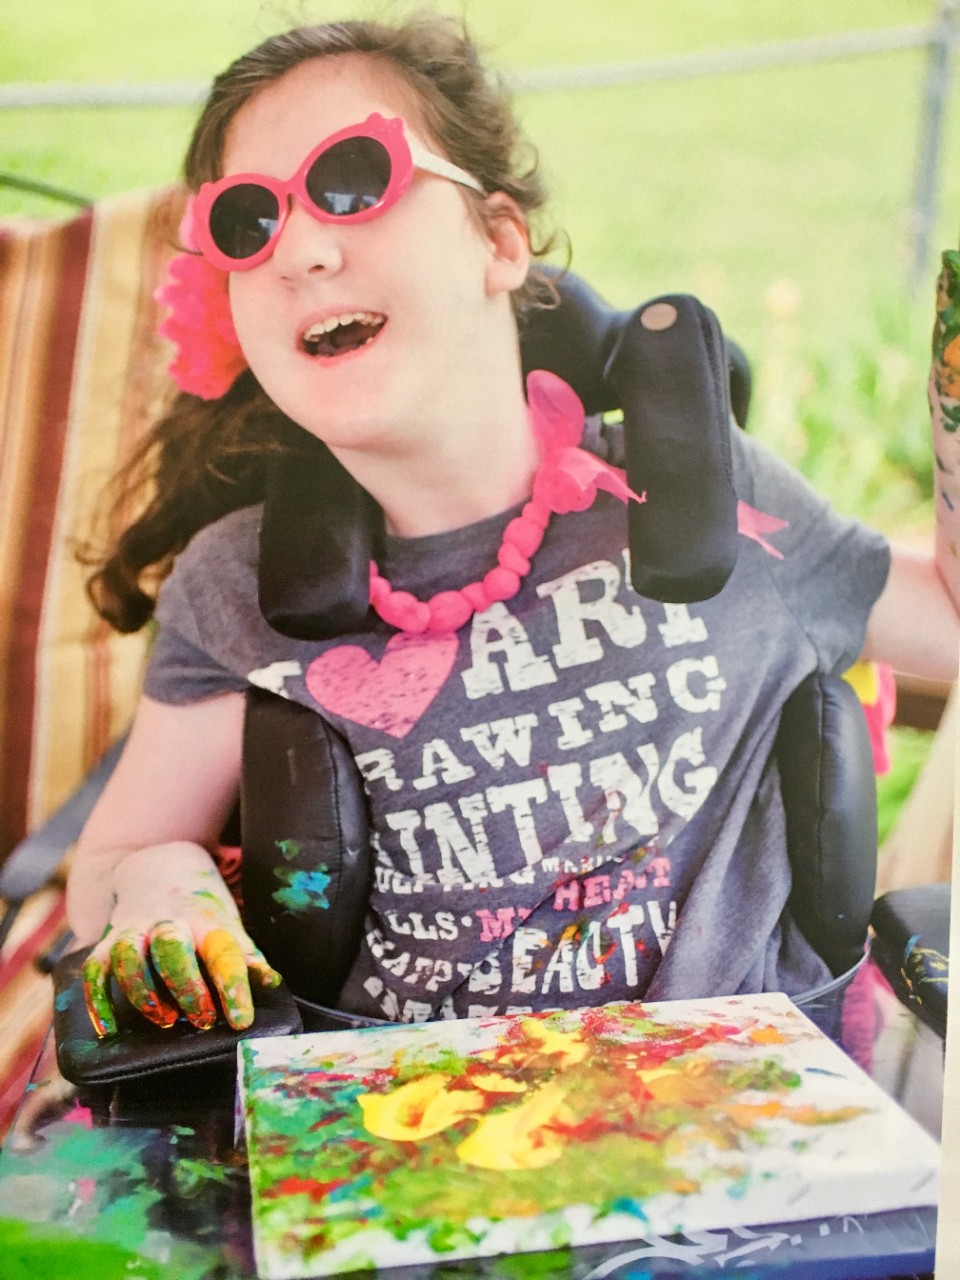 The photo shows a young girl with curly brown hair in a ponytail, with bright pink sunglasses and a big grin on her face as she sits outside in her wheelchair in the sunshine. Her hands and shirt are covered in paint as she creates a painting on a canvas resting on her lap